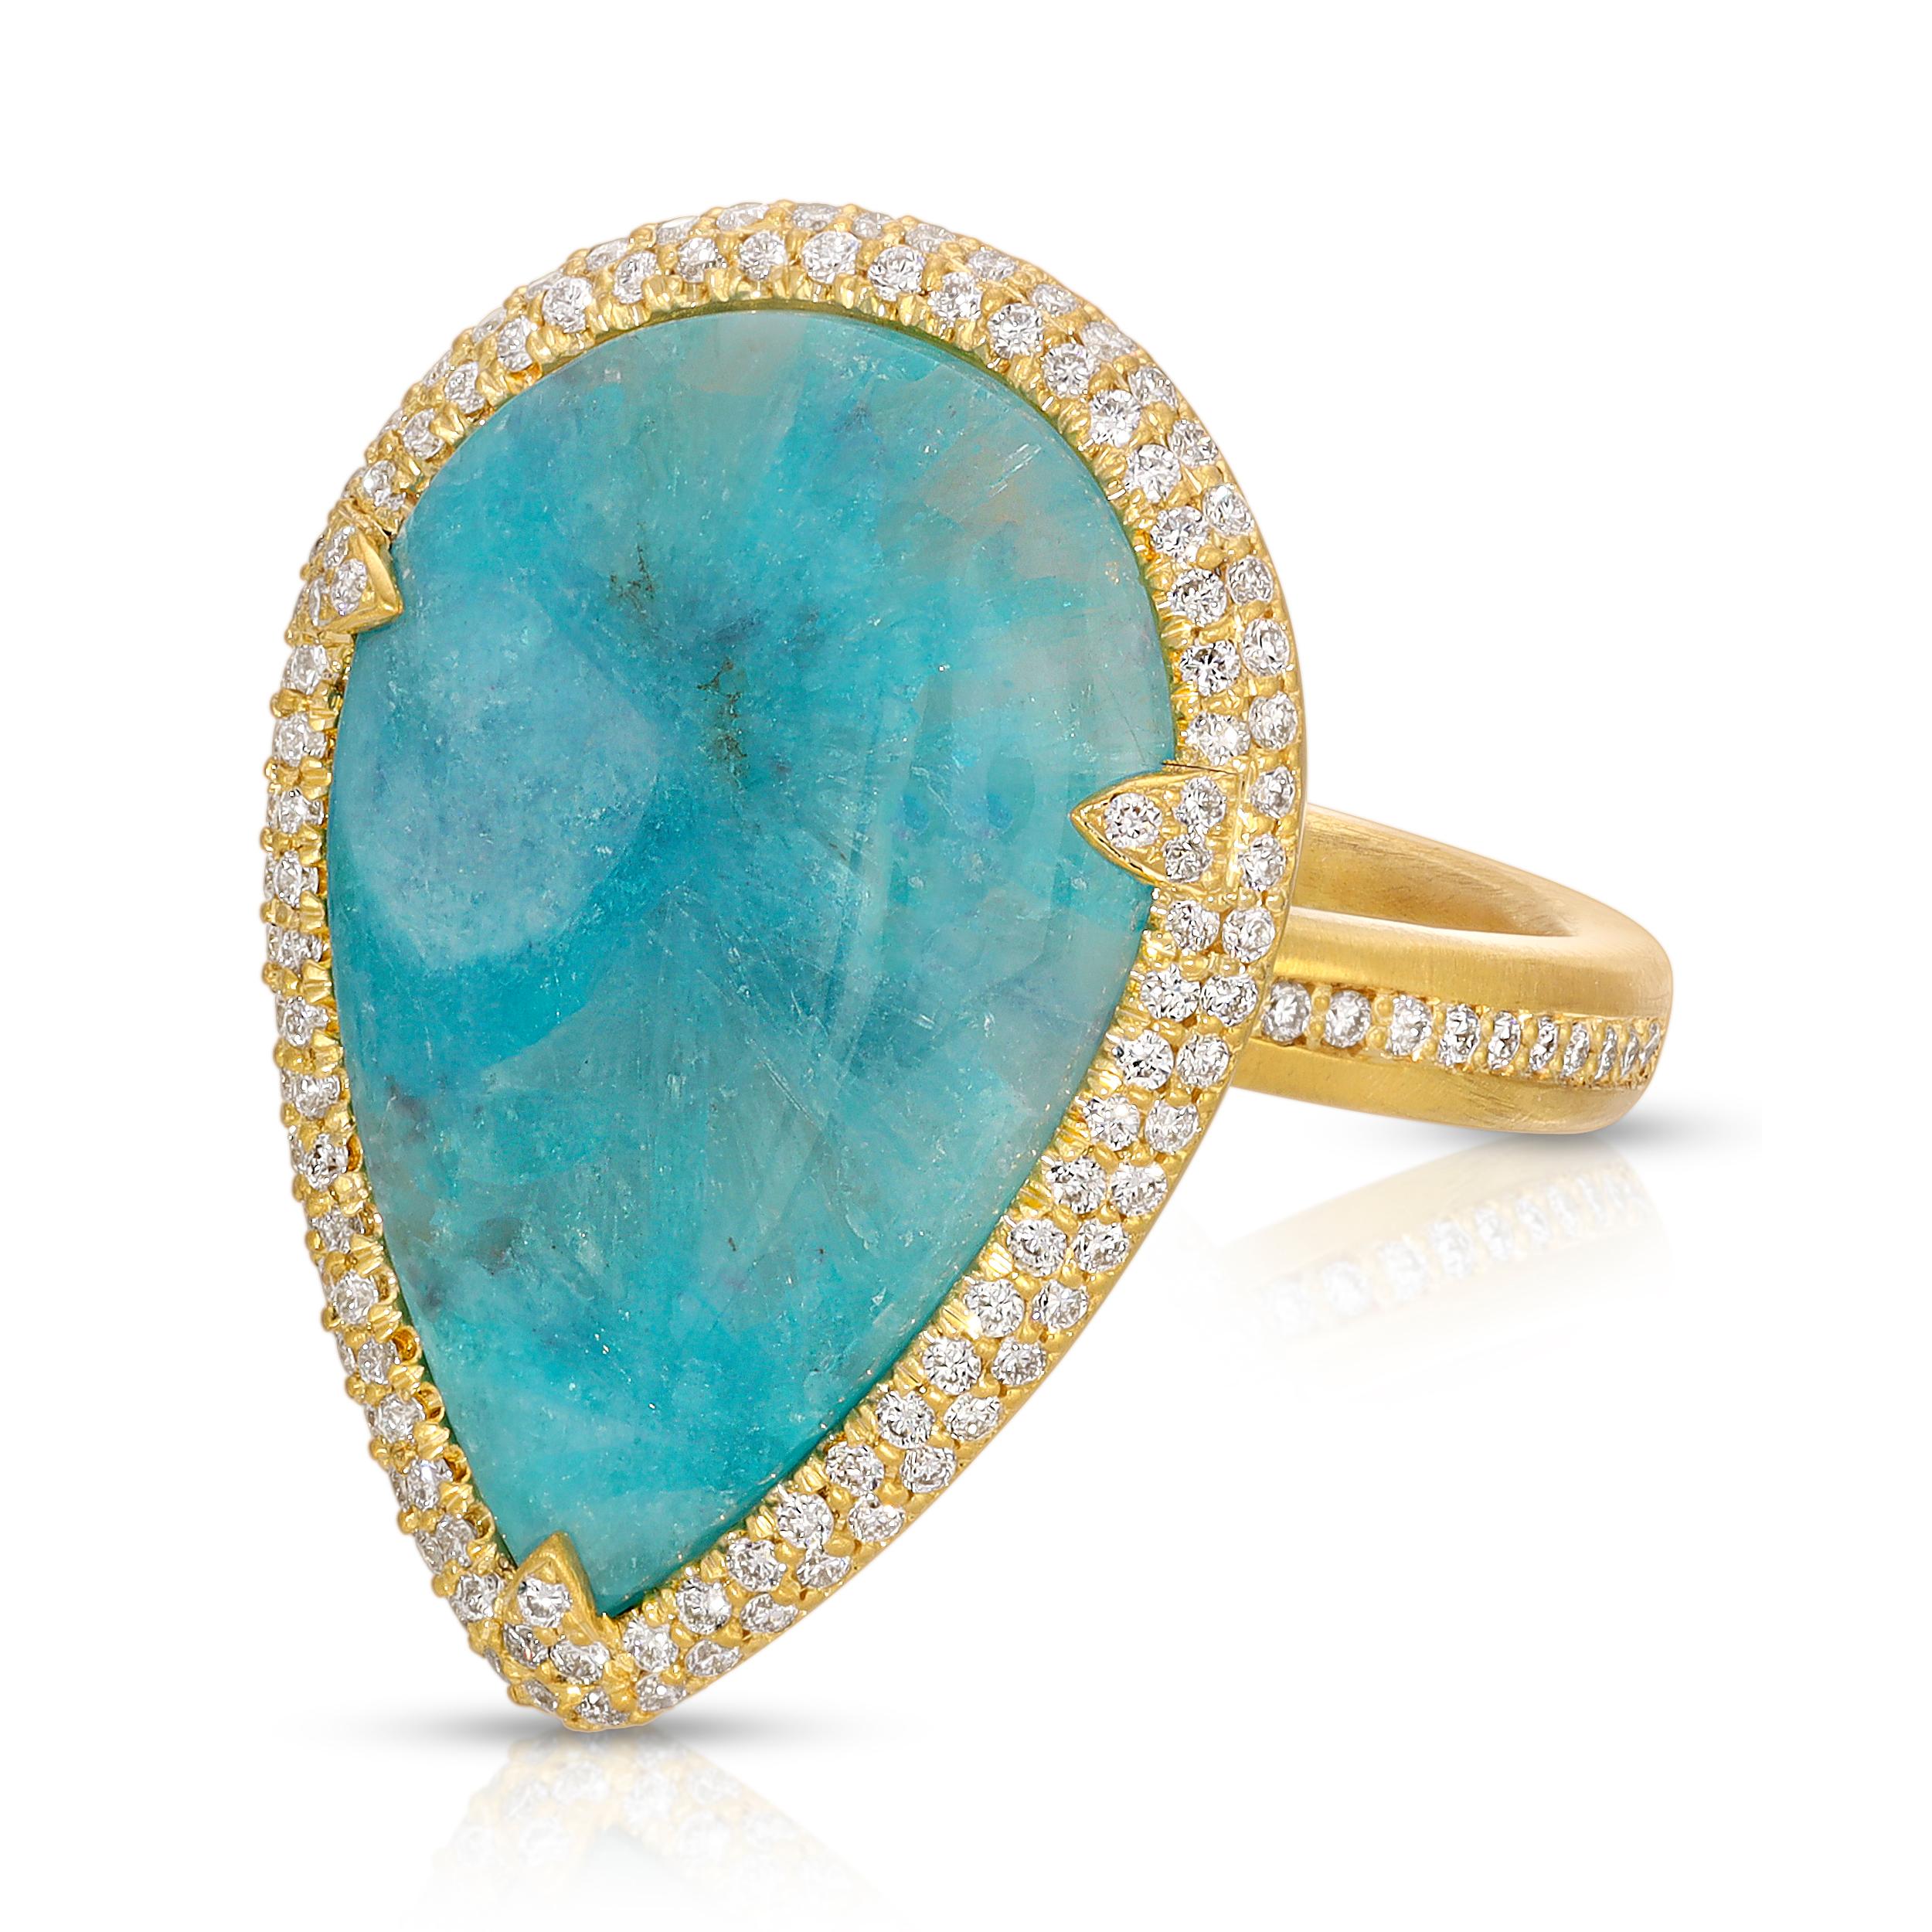 This special 8.24ct Milky Brazilian Paraiba comes from only one mine in Brazil and is very unusual as typical Paraiba is clear blue. The life and character of these Milky stones truly makes them one of a kind. It is set in 18k Matte Gold with a